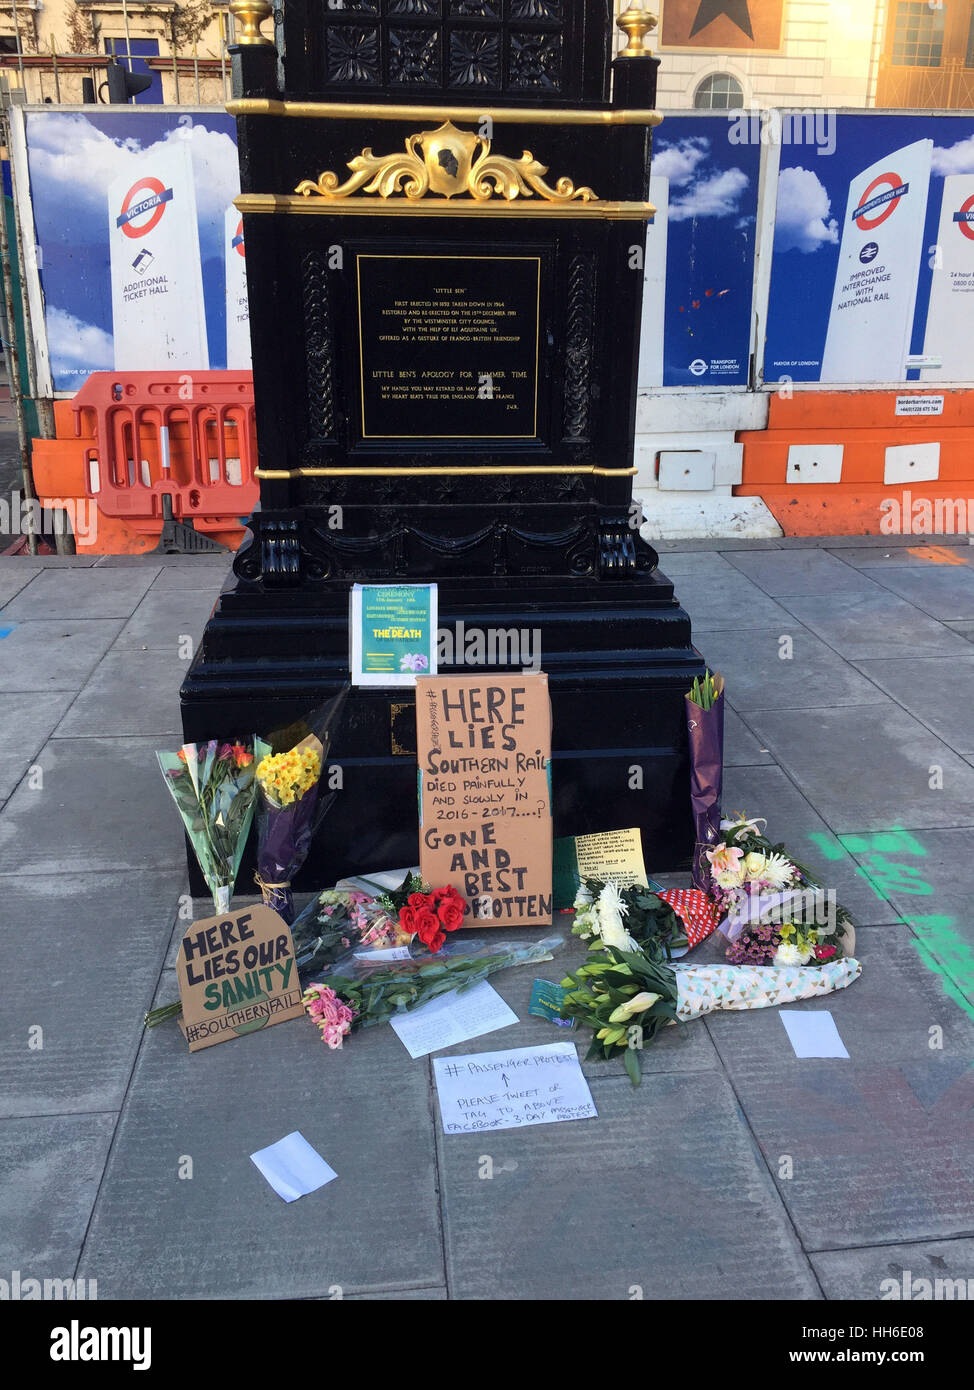 A passenger protest next to the Little Ben clock near Victoria Station in London, where Southern Rail commuters have left floral tributes after hundreds of thousands of passengers were hit by three days of strikes last week and have endured months of disruption because of industrial action, staff shortages and other issues. Stock Photo